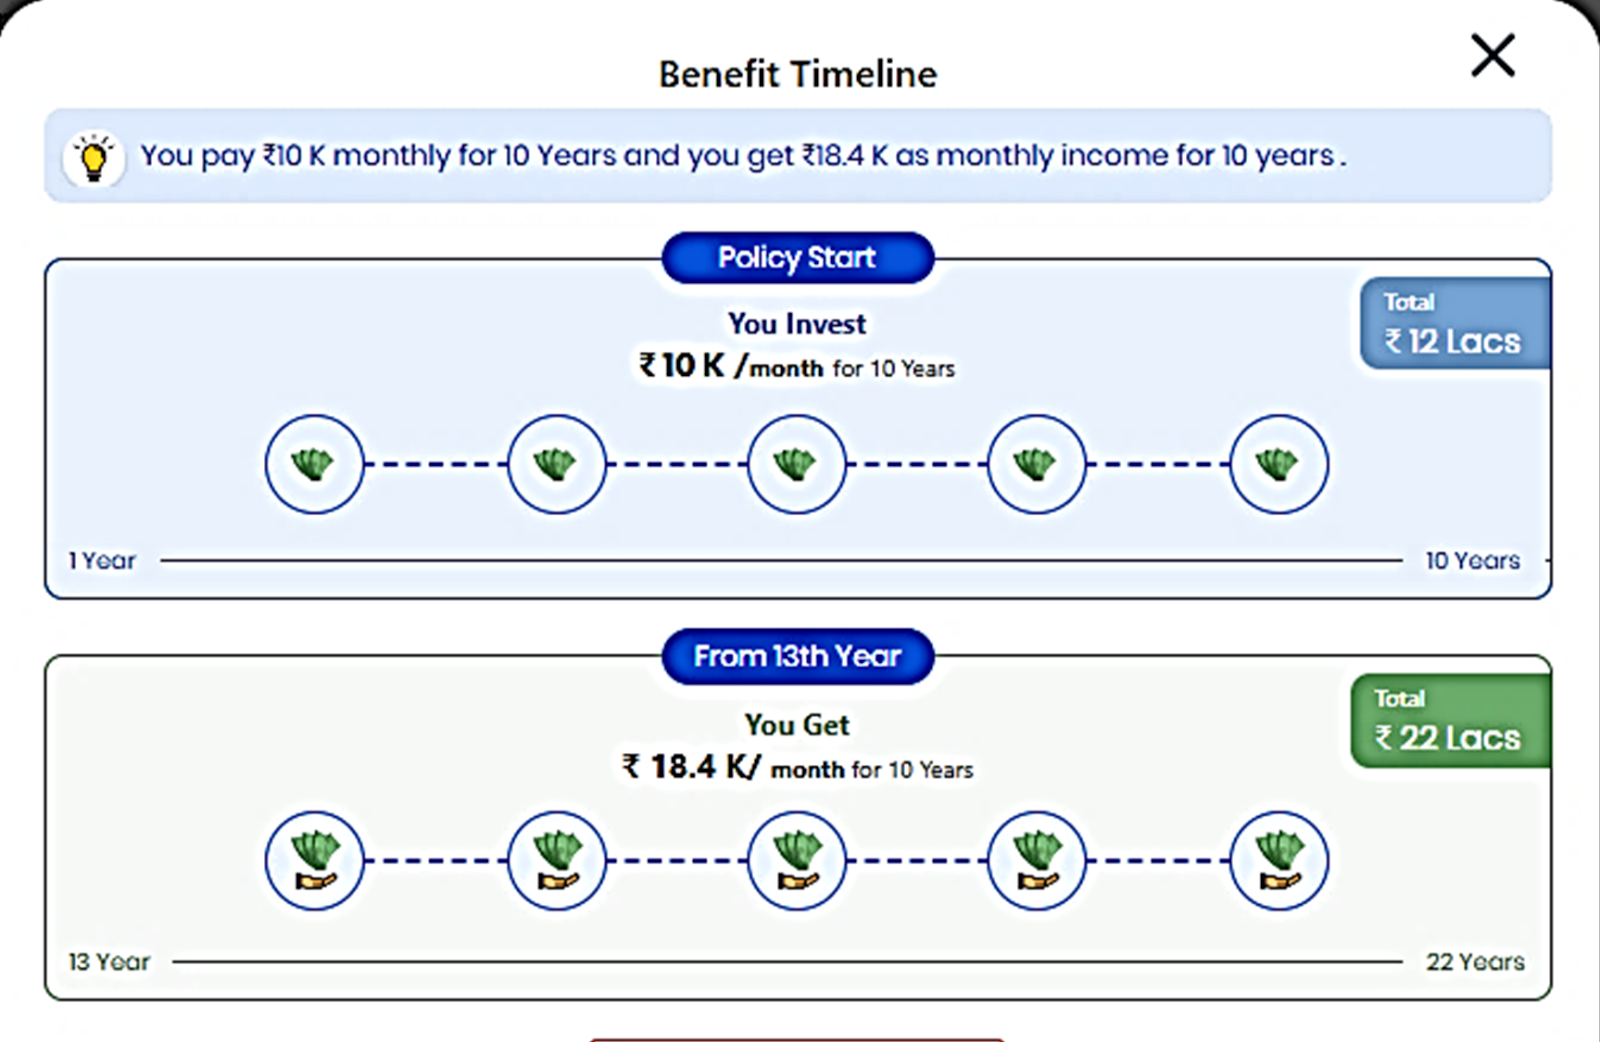 This image shows how a life insurance with guaranteed return plan will look like